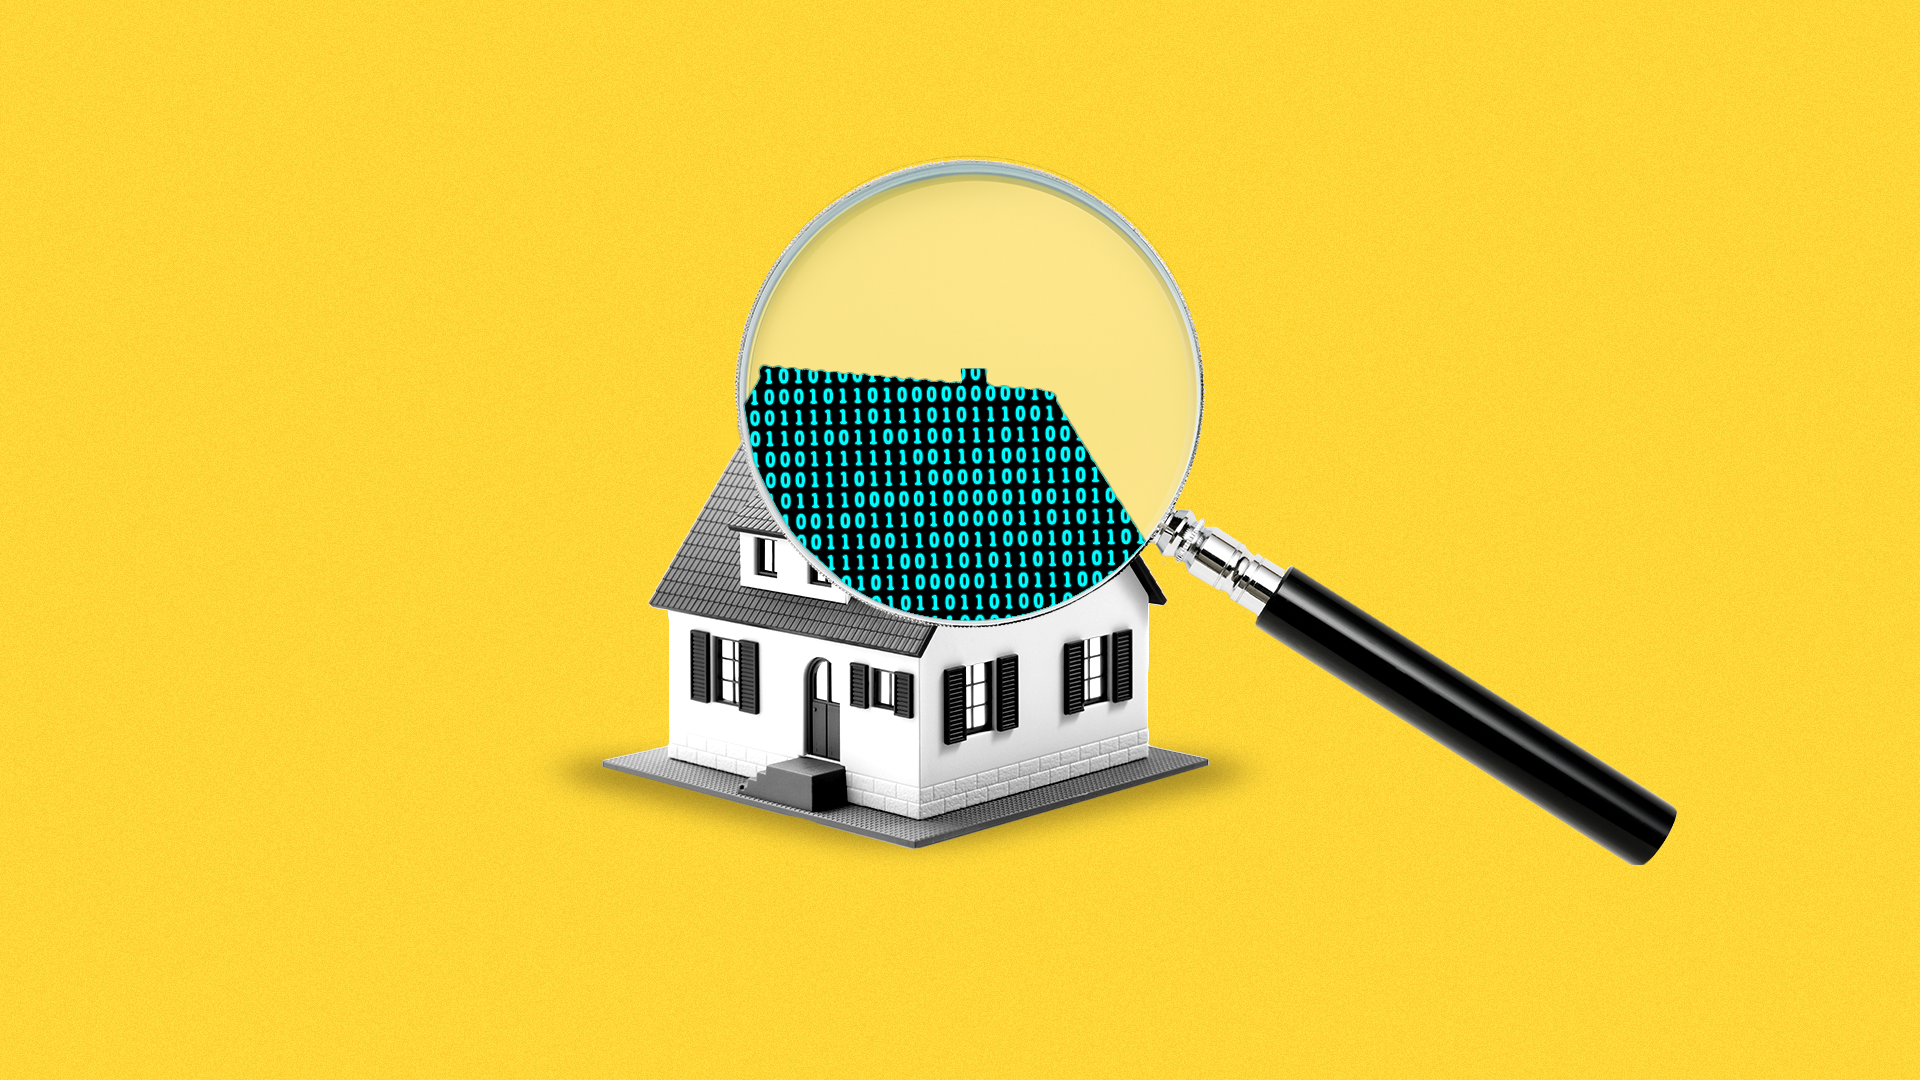 Illustration of a house being examined with a magnifying glass and revealing a binary code.